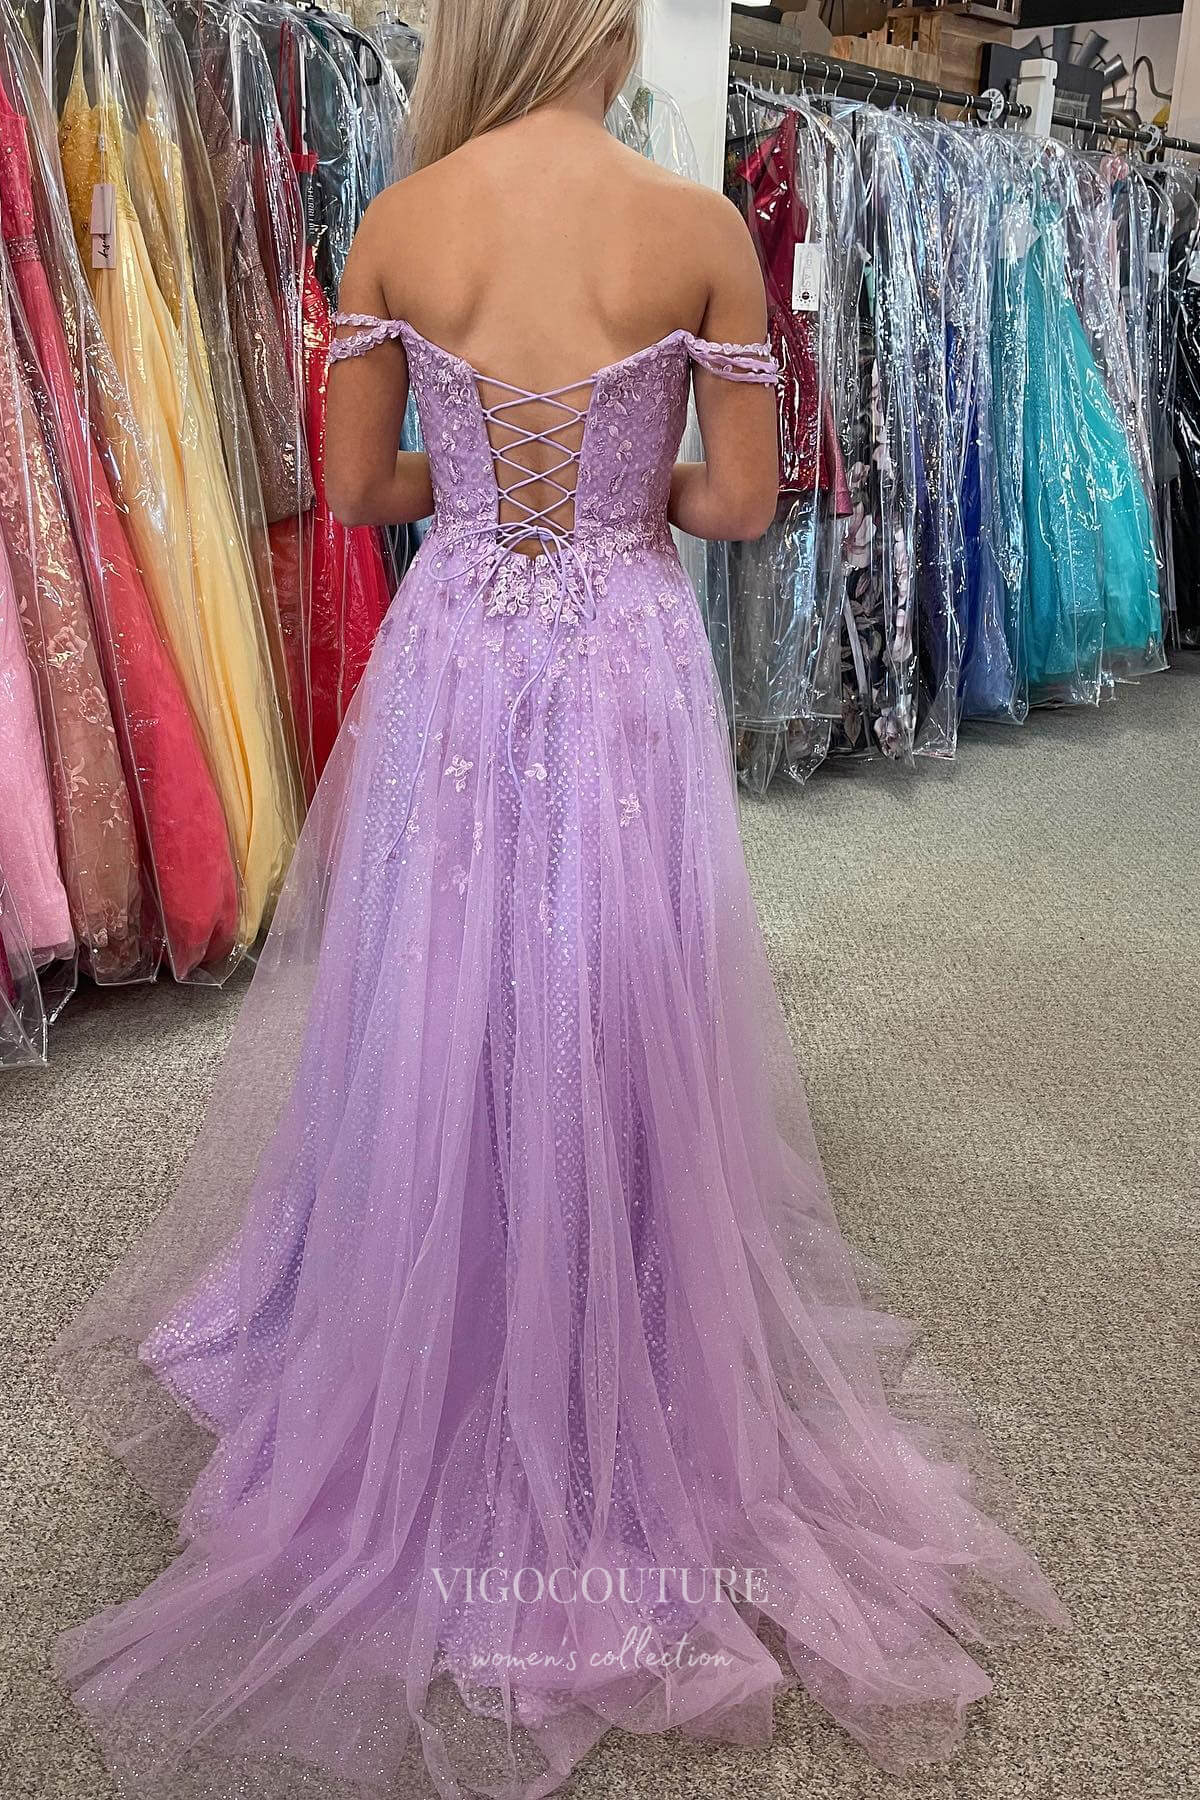 Radiant Lavender Off-Shoulder Lace Applique Prom Dress with Sparkling Tulle Skirt and Thigh-High Slit 22201-Prom Dresses-vigocouture-Lavender-US2-vigocouture